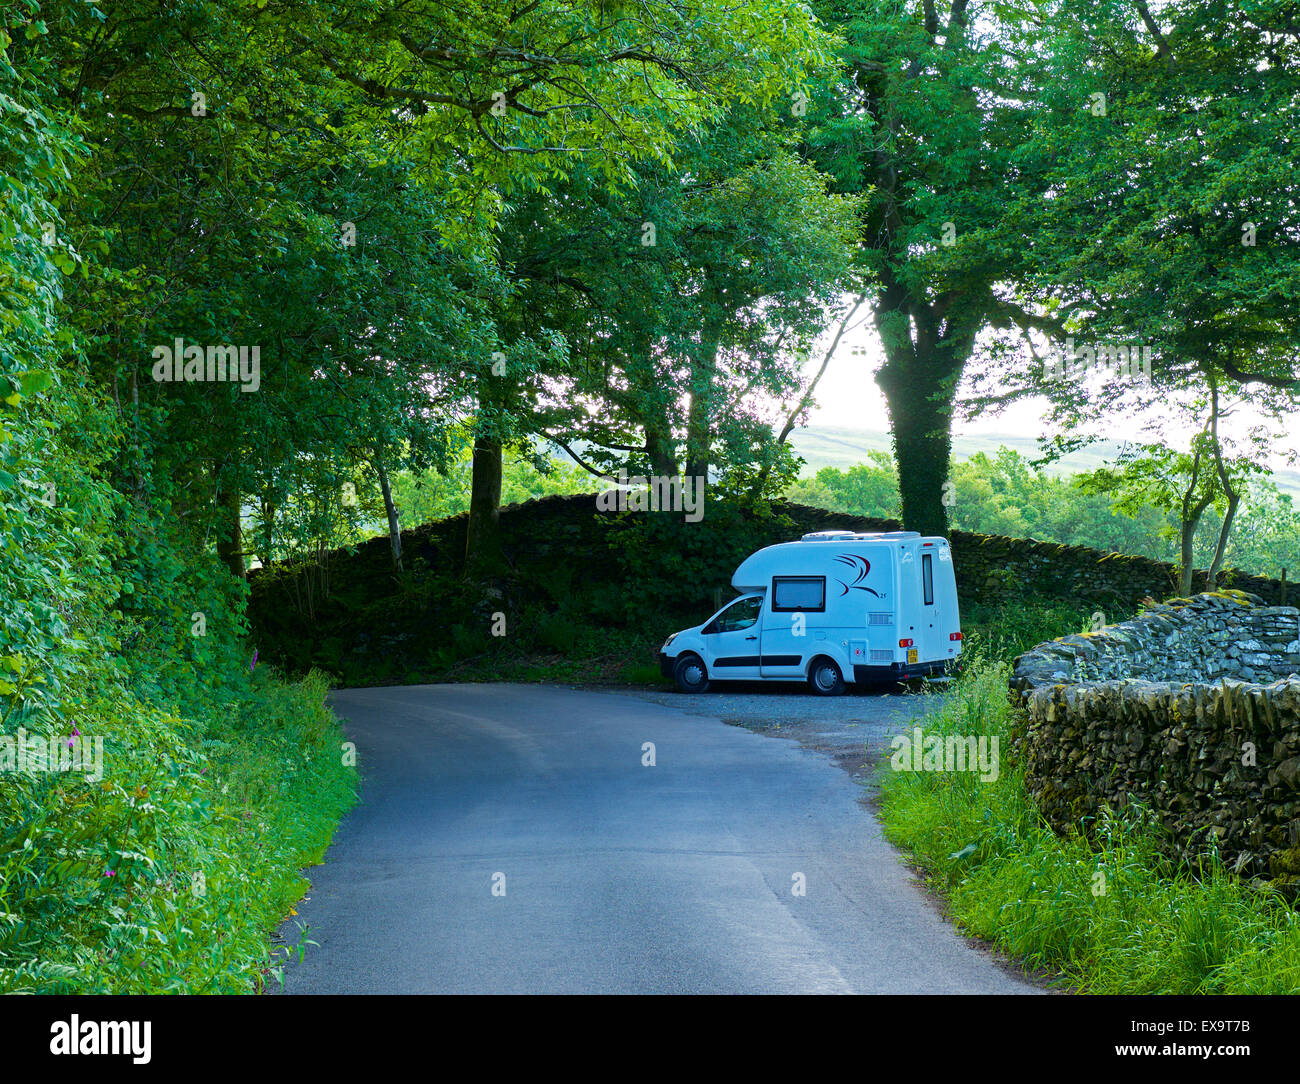 Romahome 25 small motorhome parked by road, Troutbeck Valley, Lake District National Park, Cumbria, England UK Stock Photo